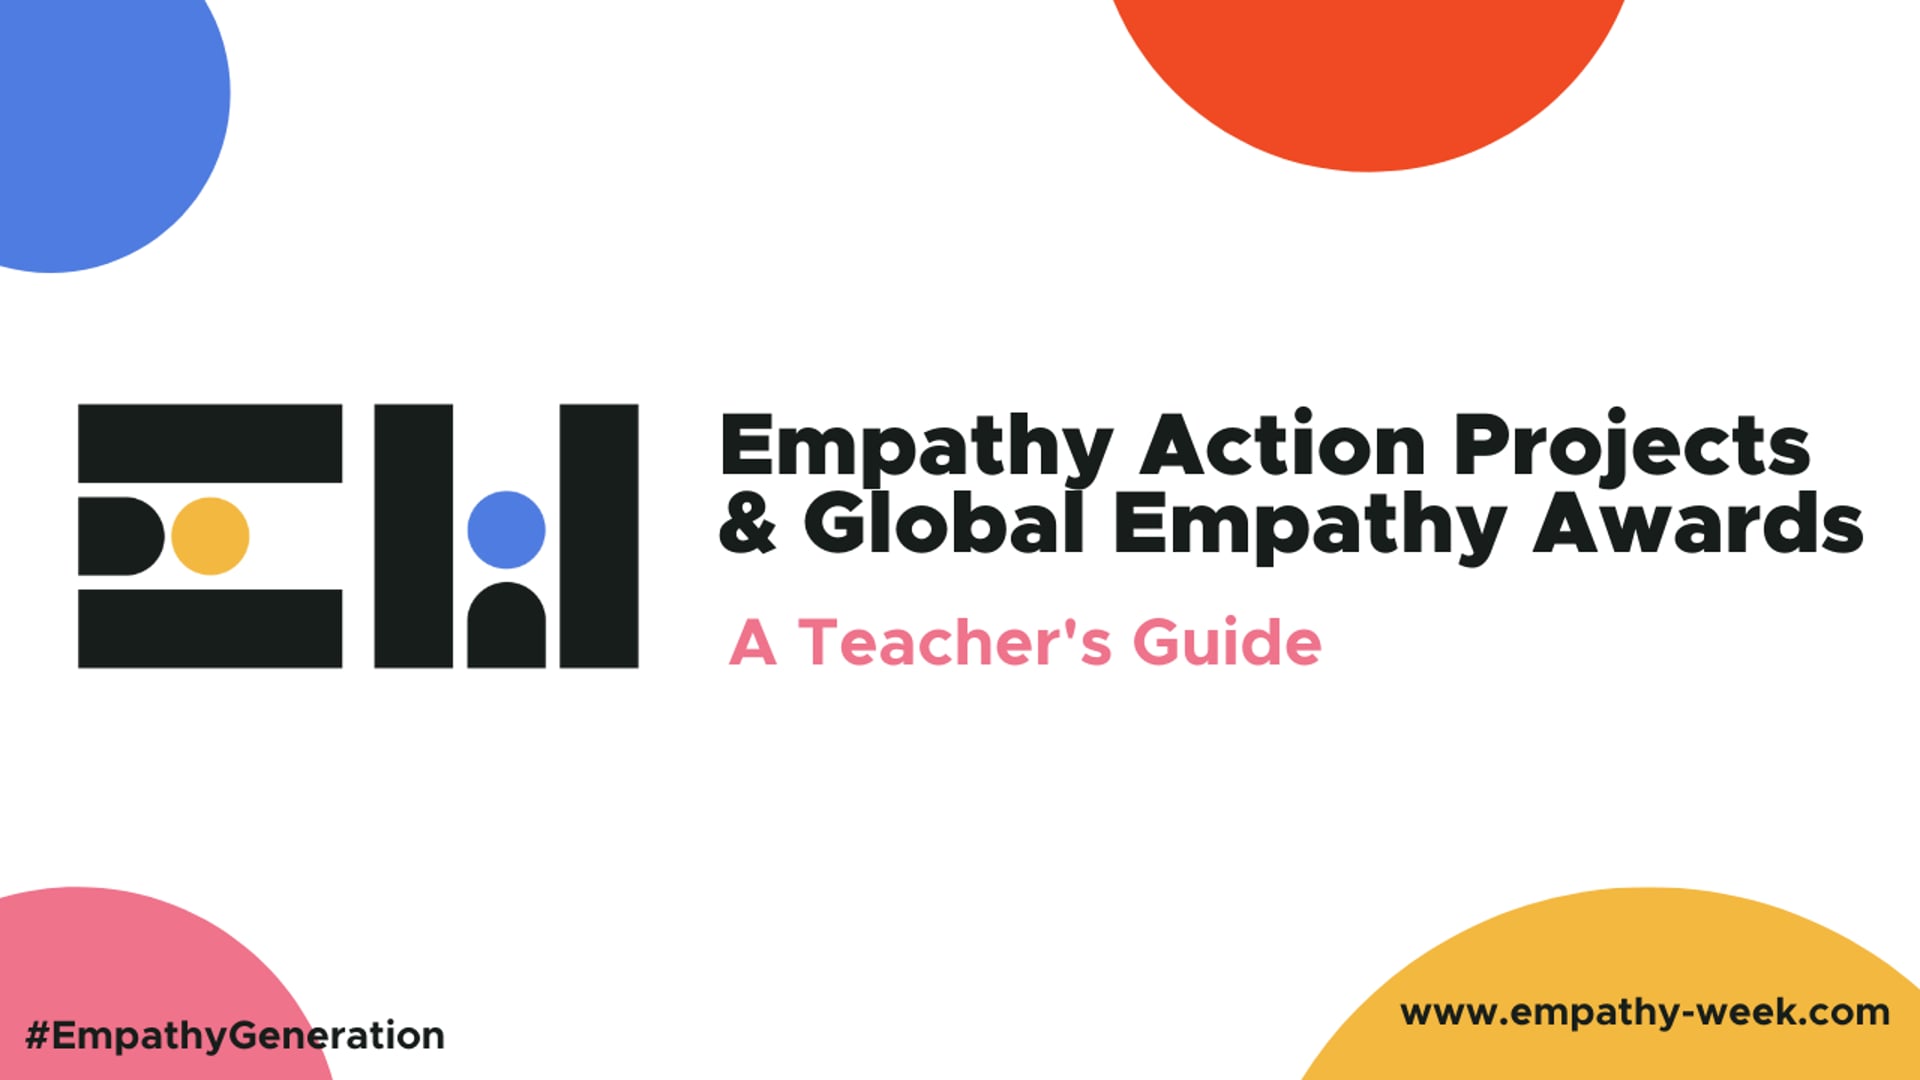 Taking part in the Empathy Action Projects and Global Empathy Awards